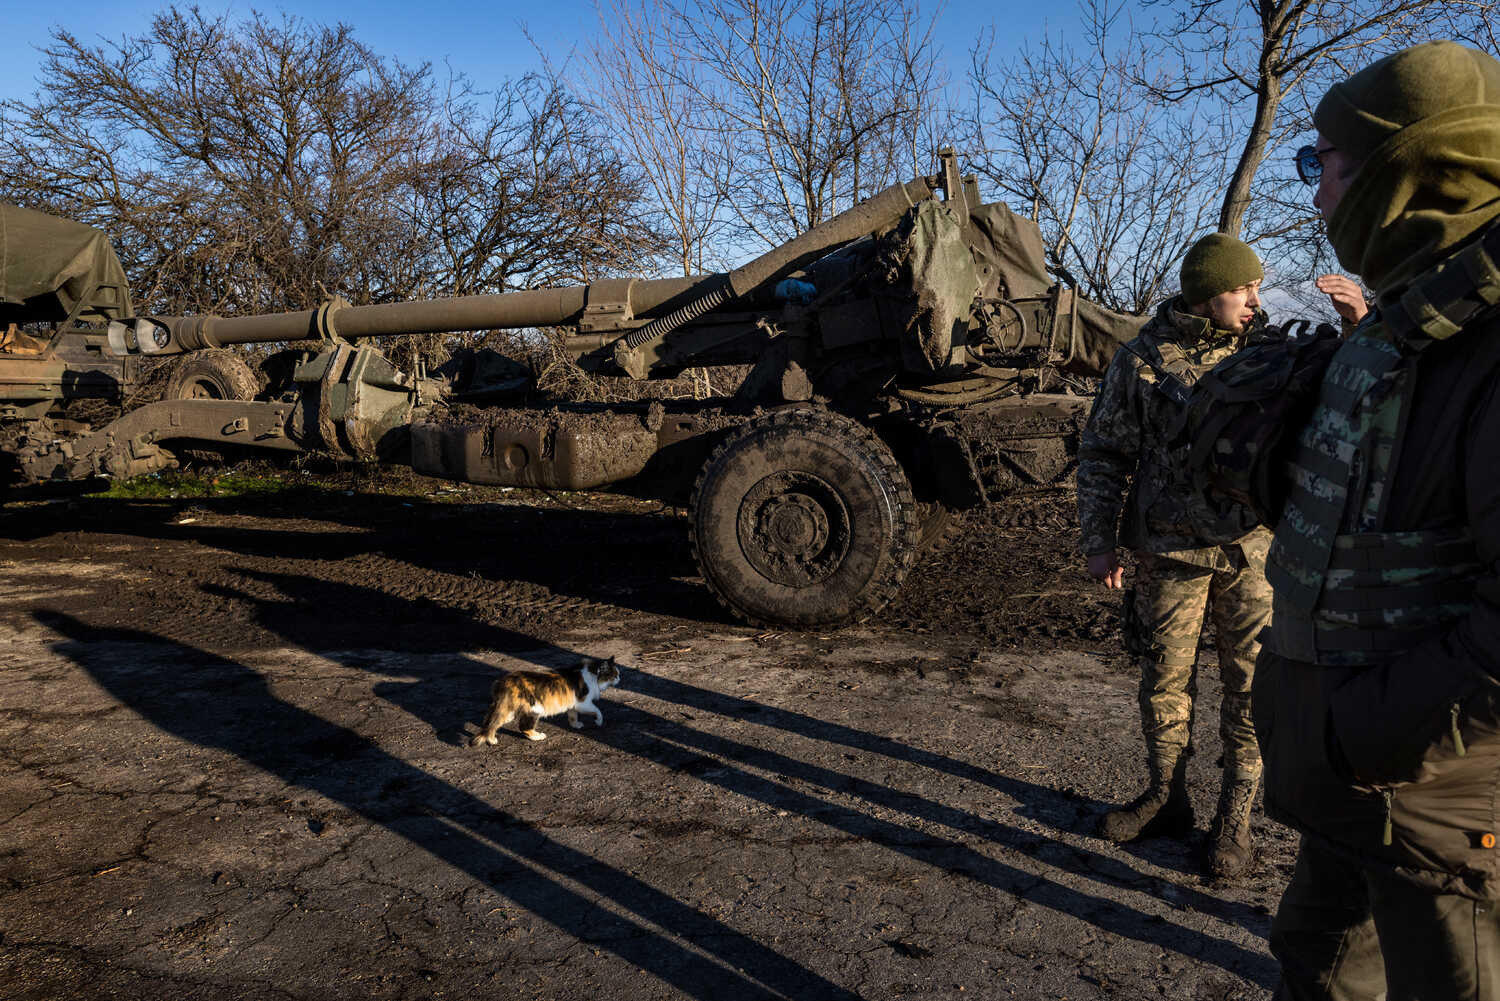 A cat walking by an artillery piece on wheels, and two soldiers.